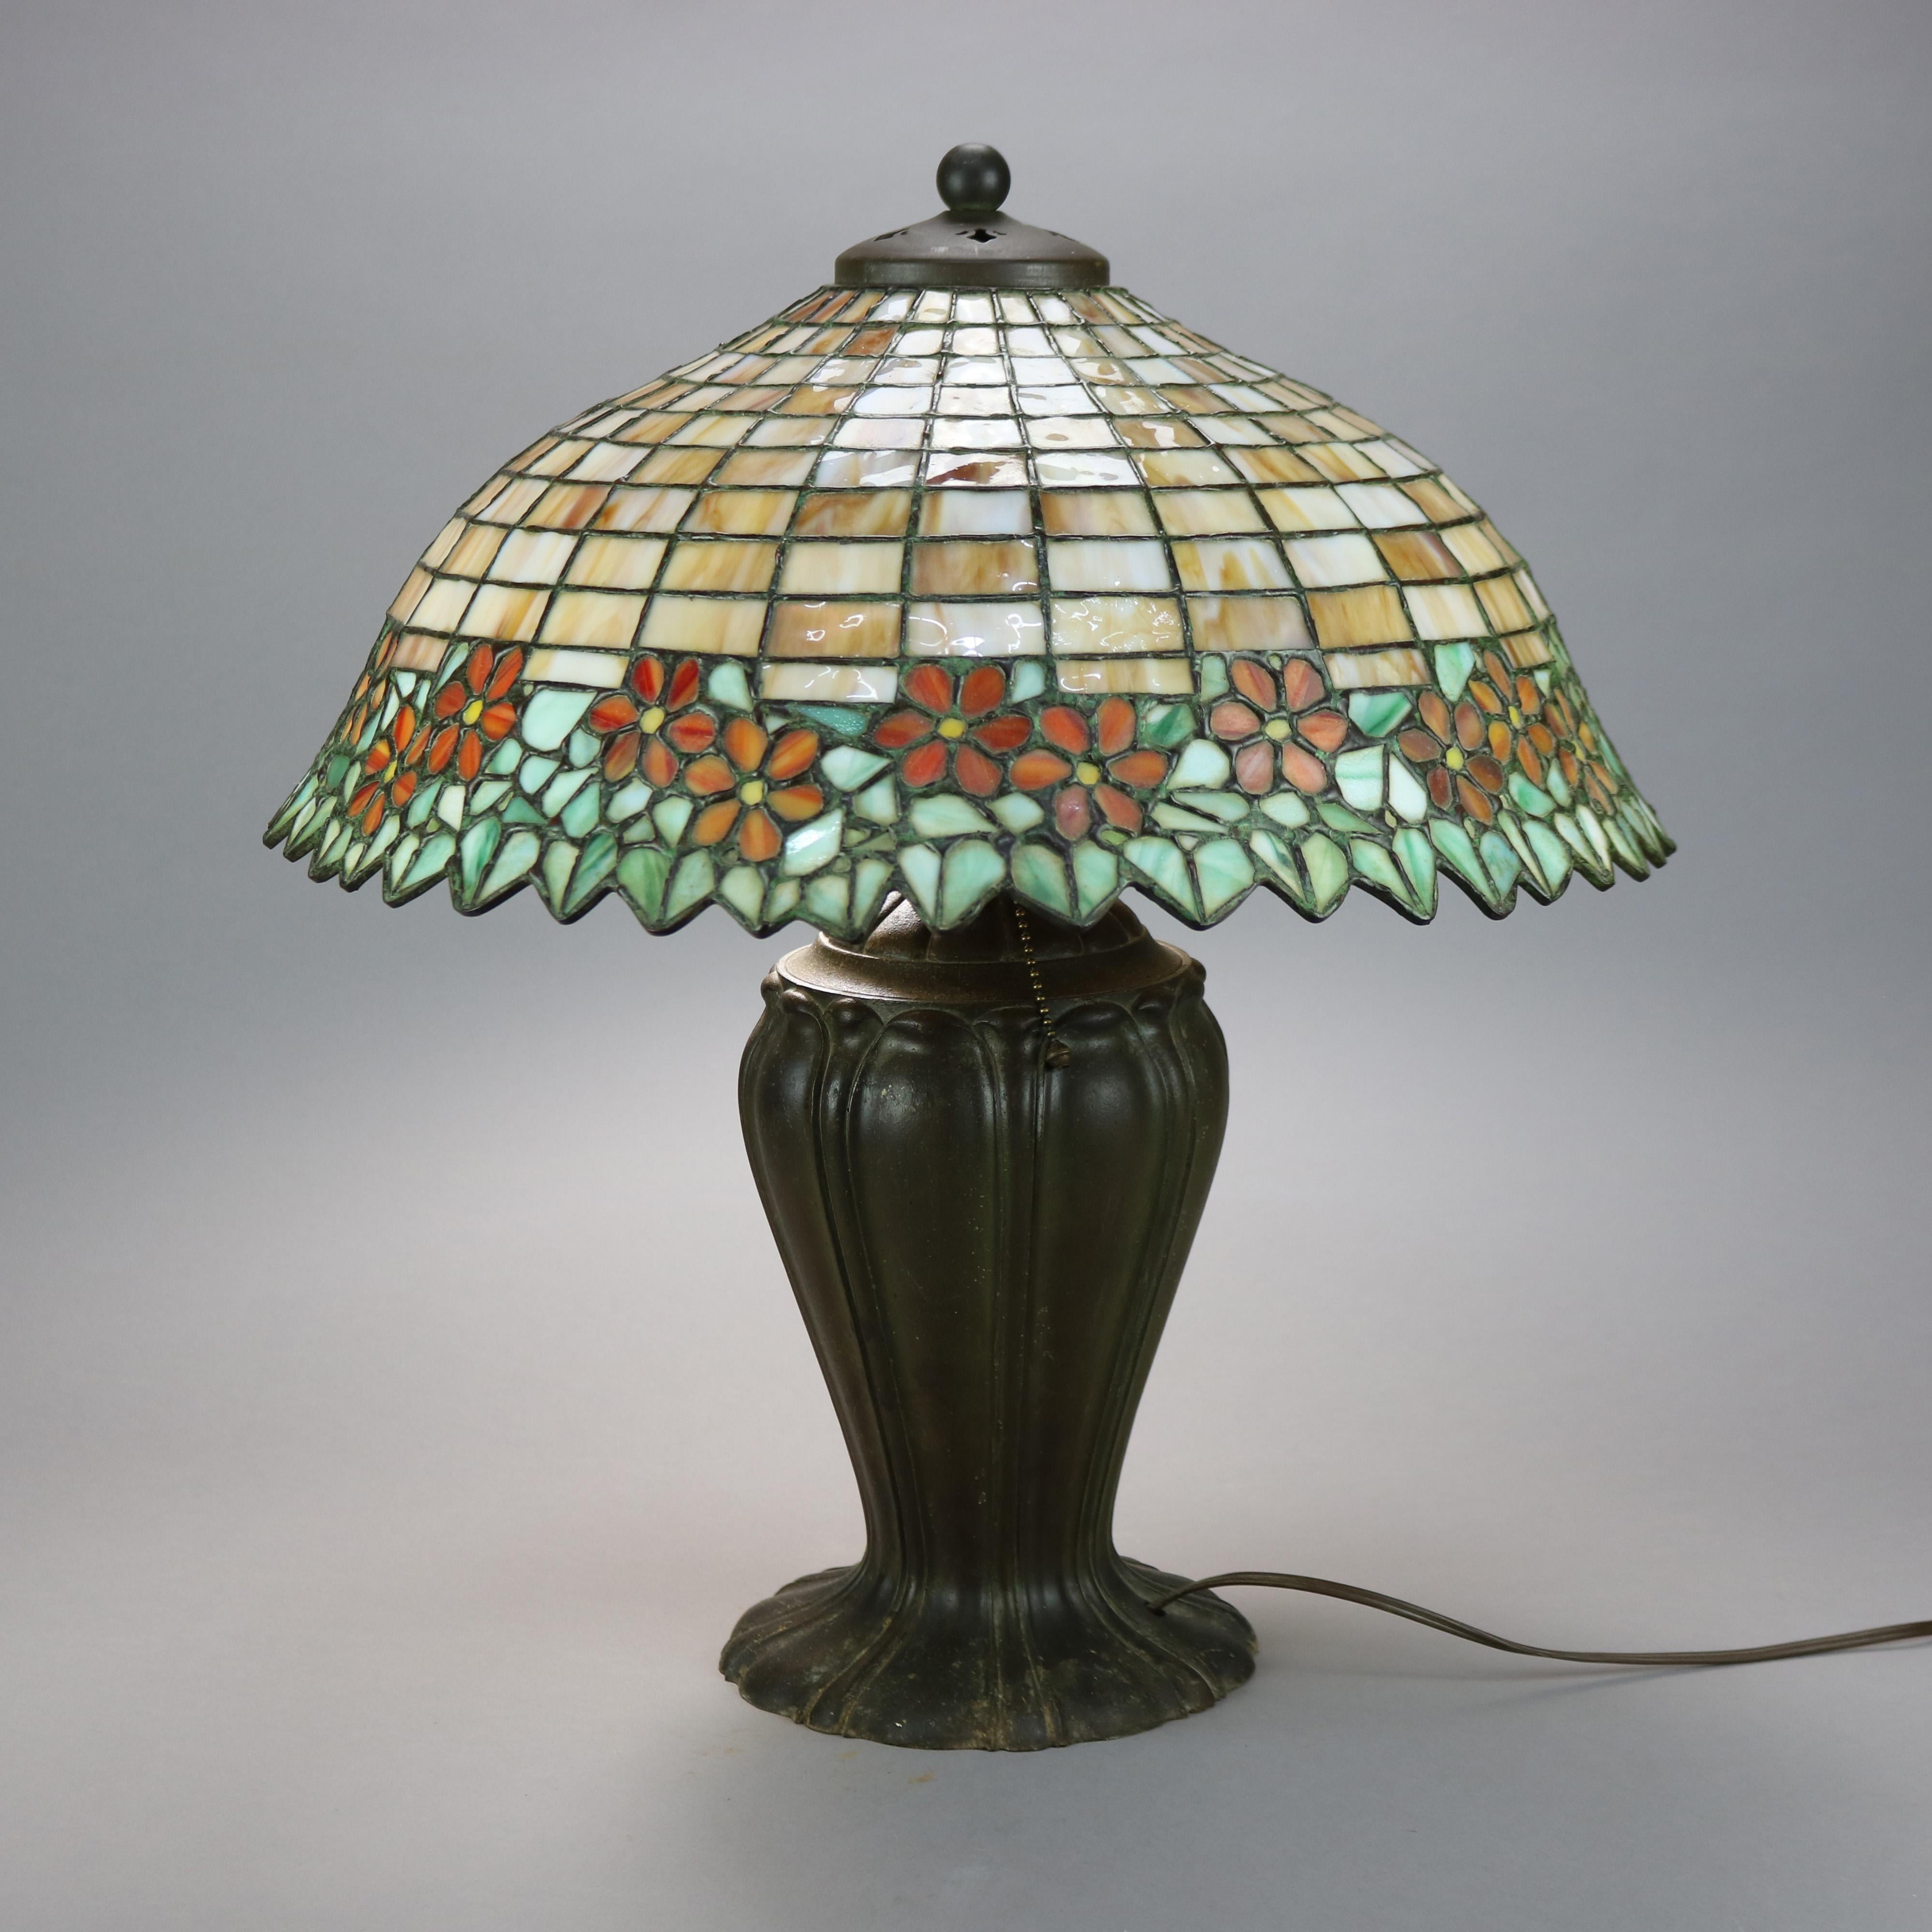 An antique Arts & Crafts table lamp offers leaded slag glass dome form shade having band of flowers attr. to Unique over cast urn form triple socket base attr. Handel, c1920

Measures - 21'' H x 19'' W x 19'' D.